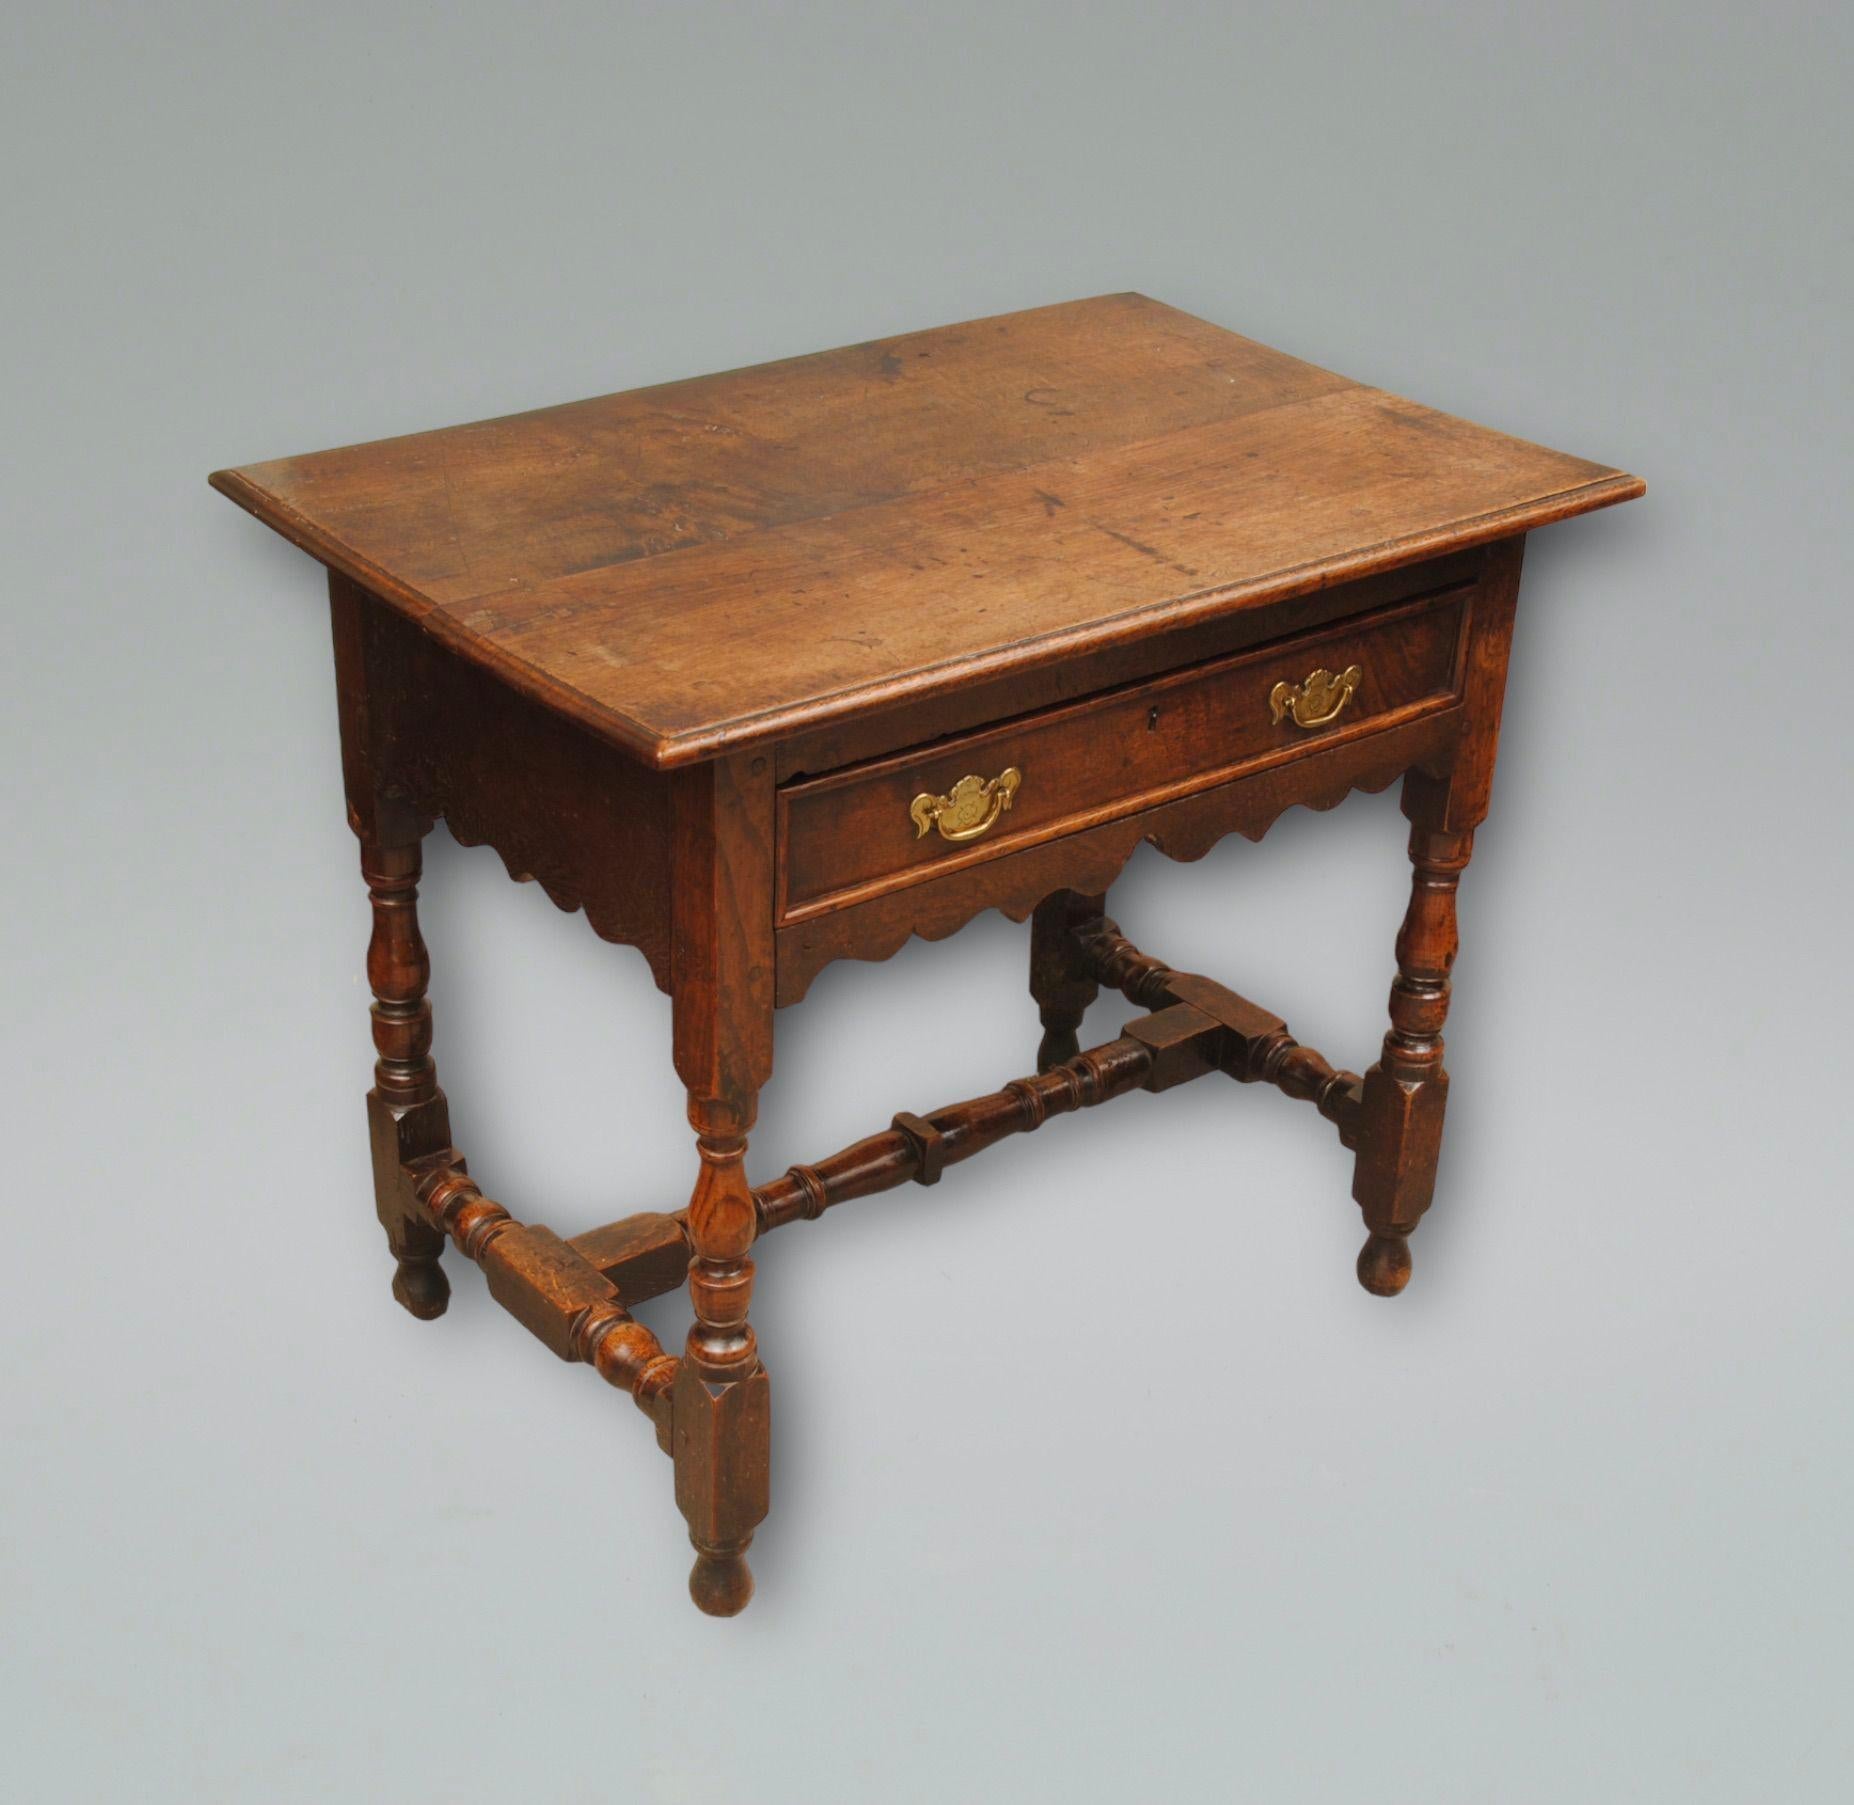 A late 17th century oak side table with turned legs and stretchers, original handles to the single drawer above a wavey frieze. good mellow colour and deep patination